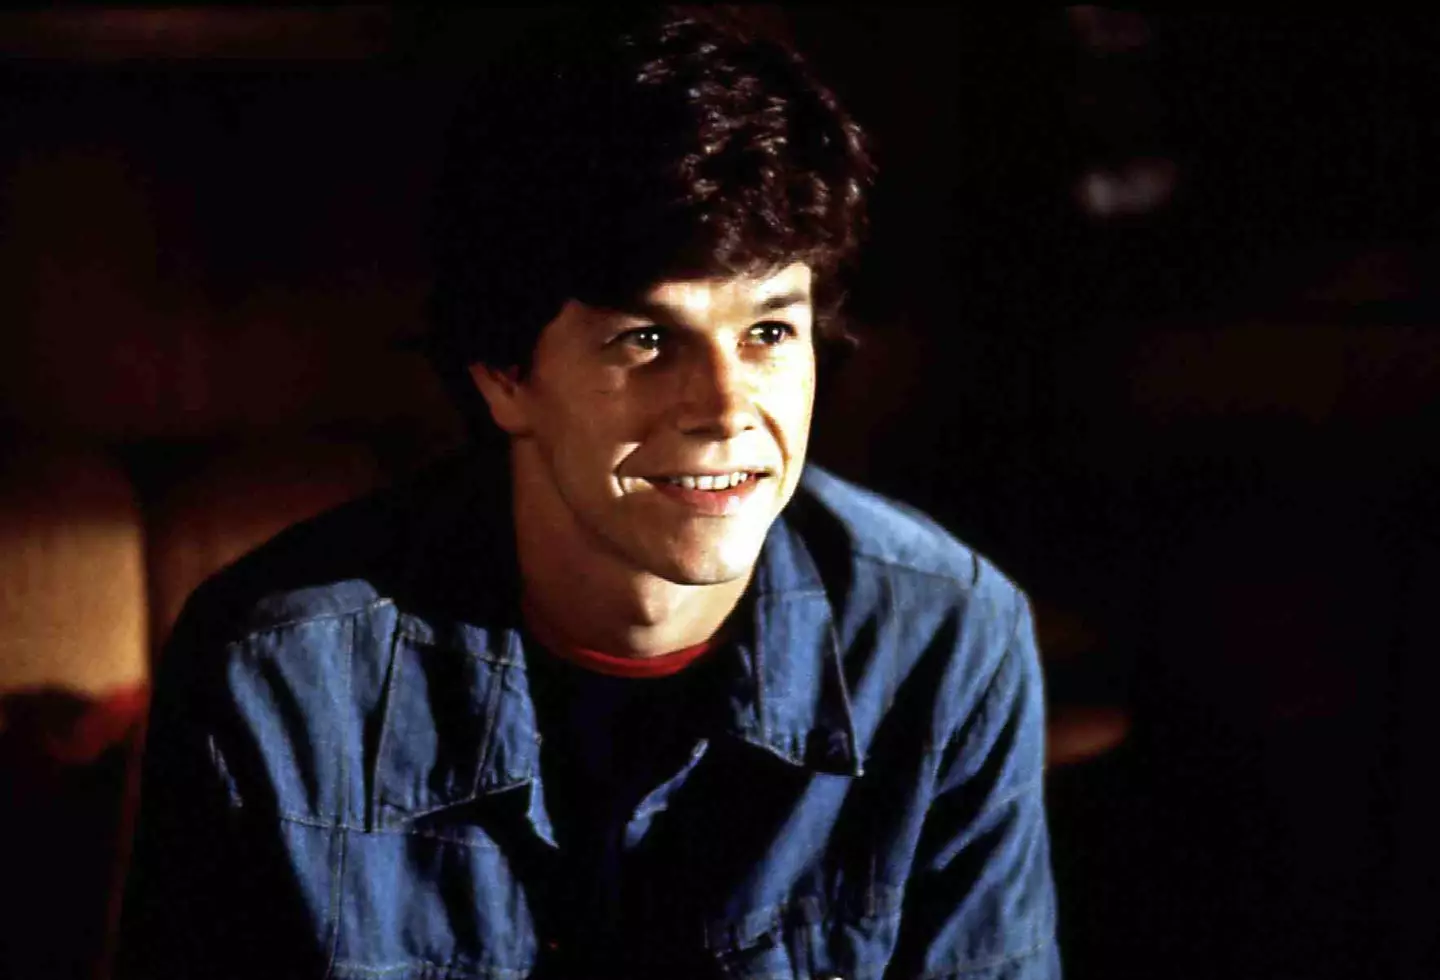 The Boogie Nights role DiCaprio wanted ended up going to Mark Wahlberg instead.